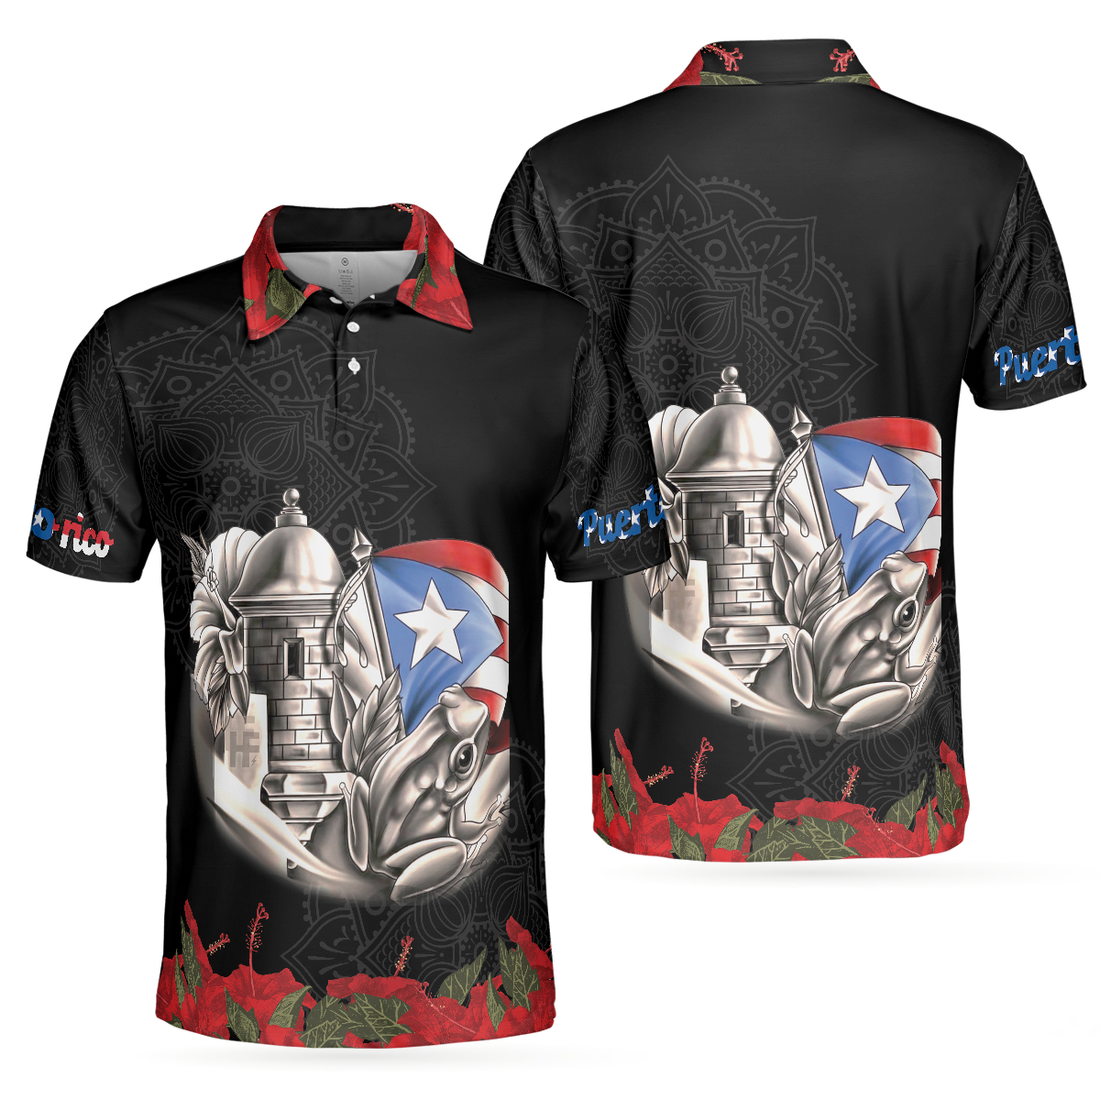 Puerto Rico Manga Flower Polo Shirt US Polo Shirt For Men And Women Best Gift For American Fans - 1